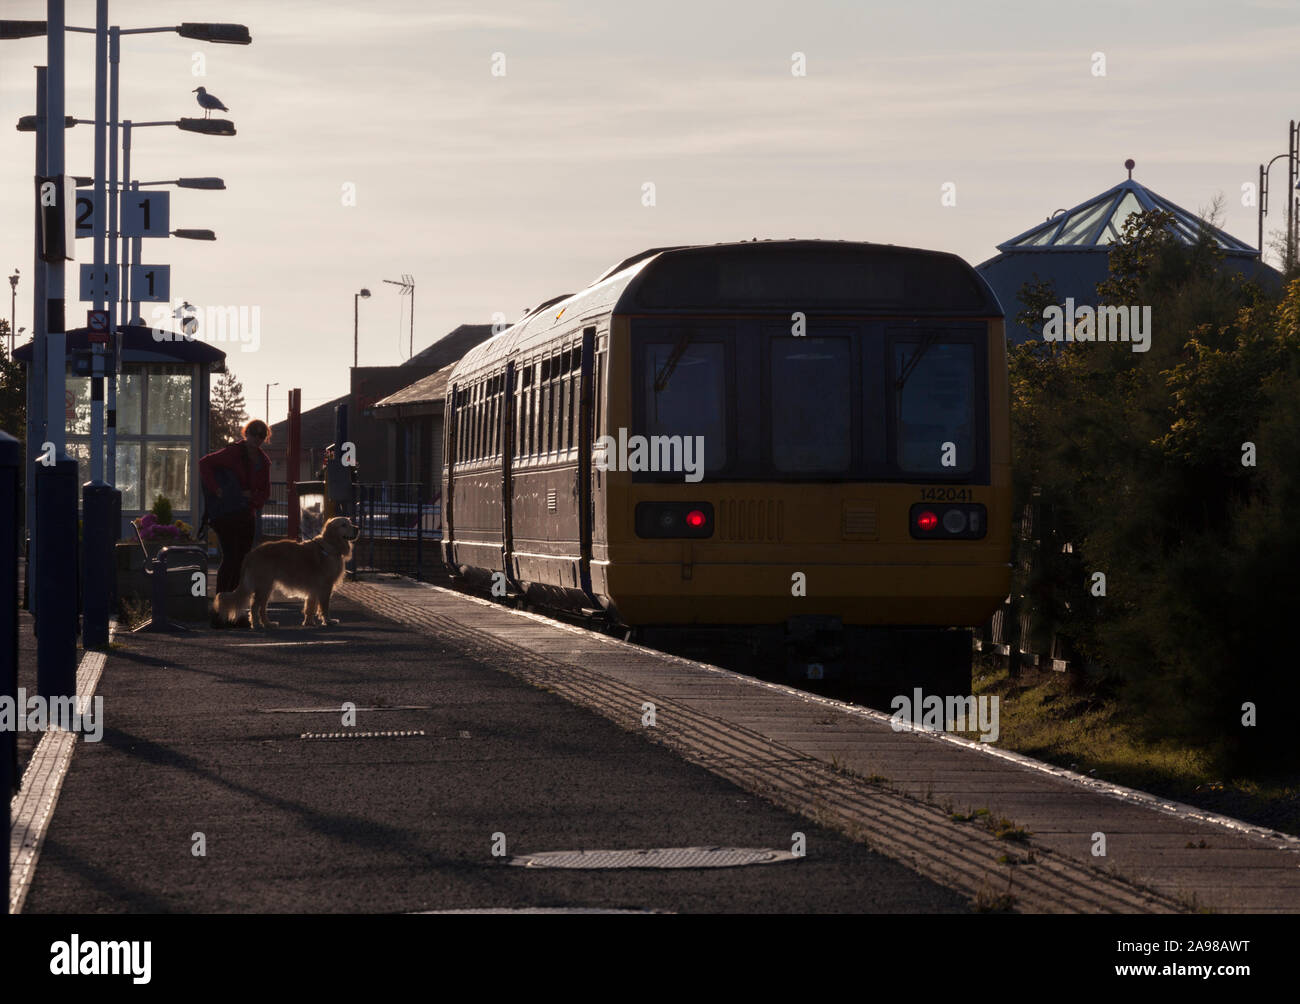 Arriva Northern rail class 142 pacer train at Morecambe with waiting passengers Stock Photo